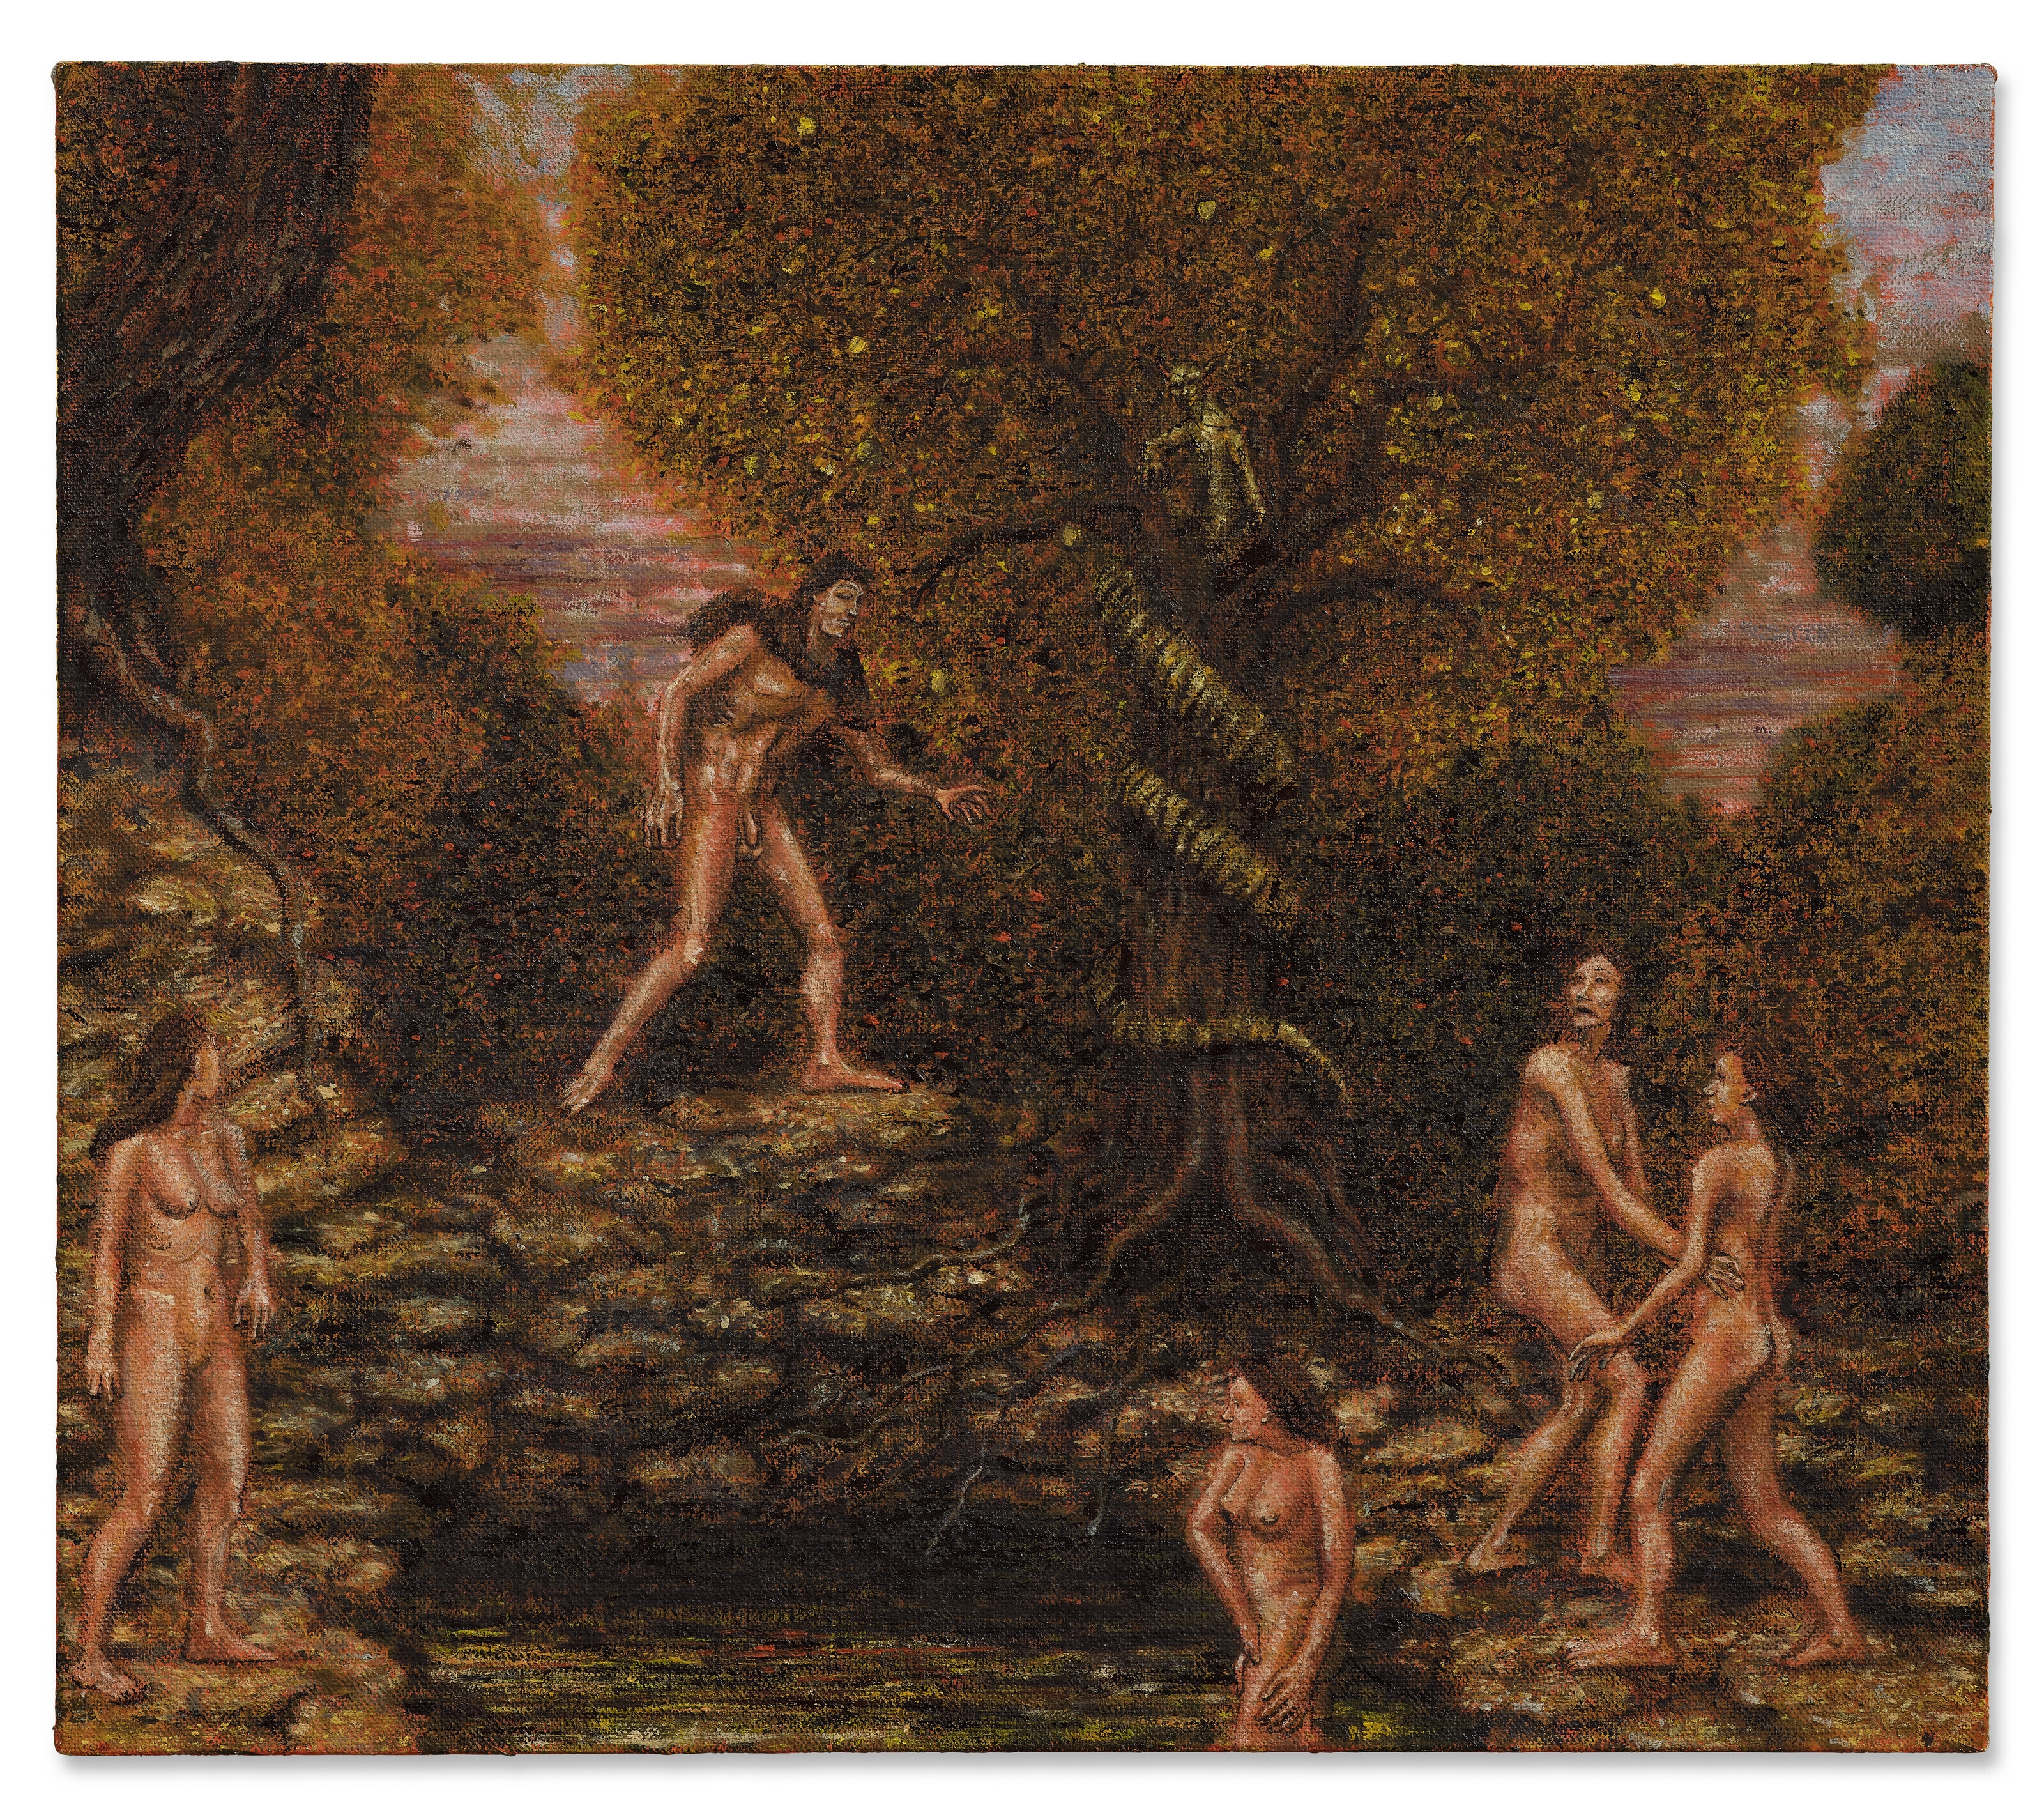 Heracles In The Garden Of The Hesperides by J.P. Munro, Painted in 2007